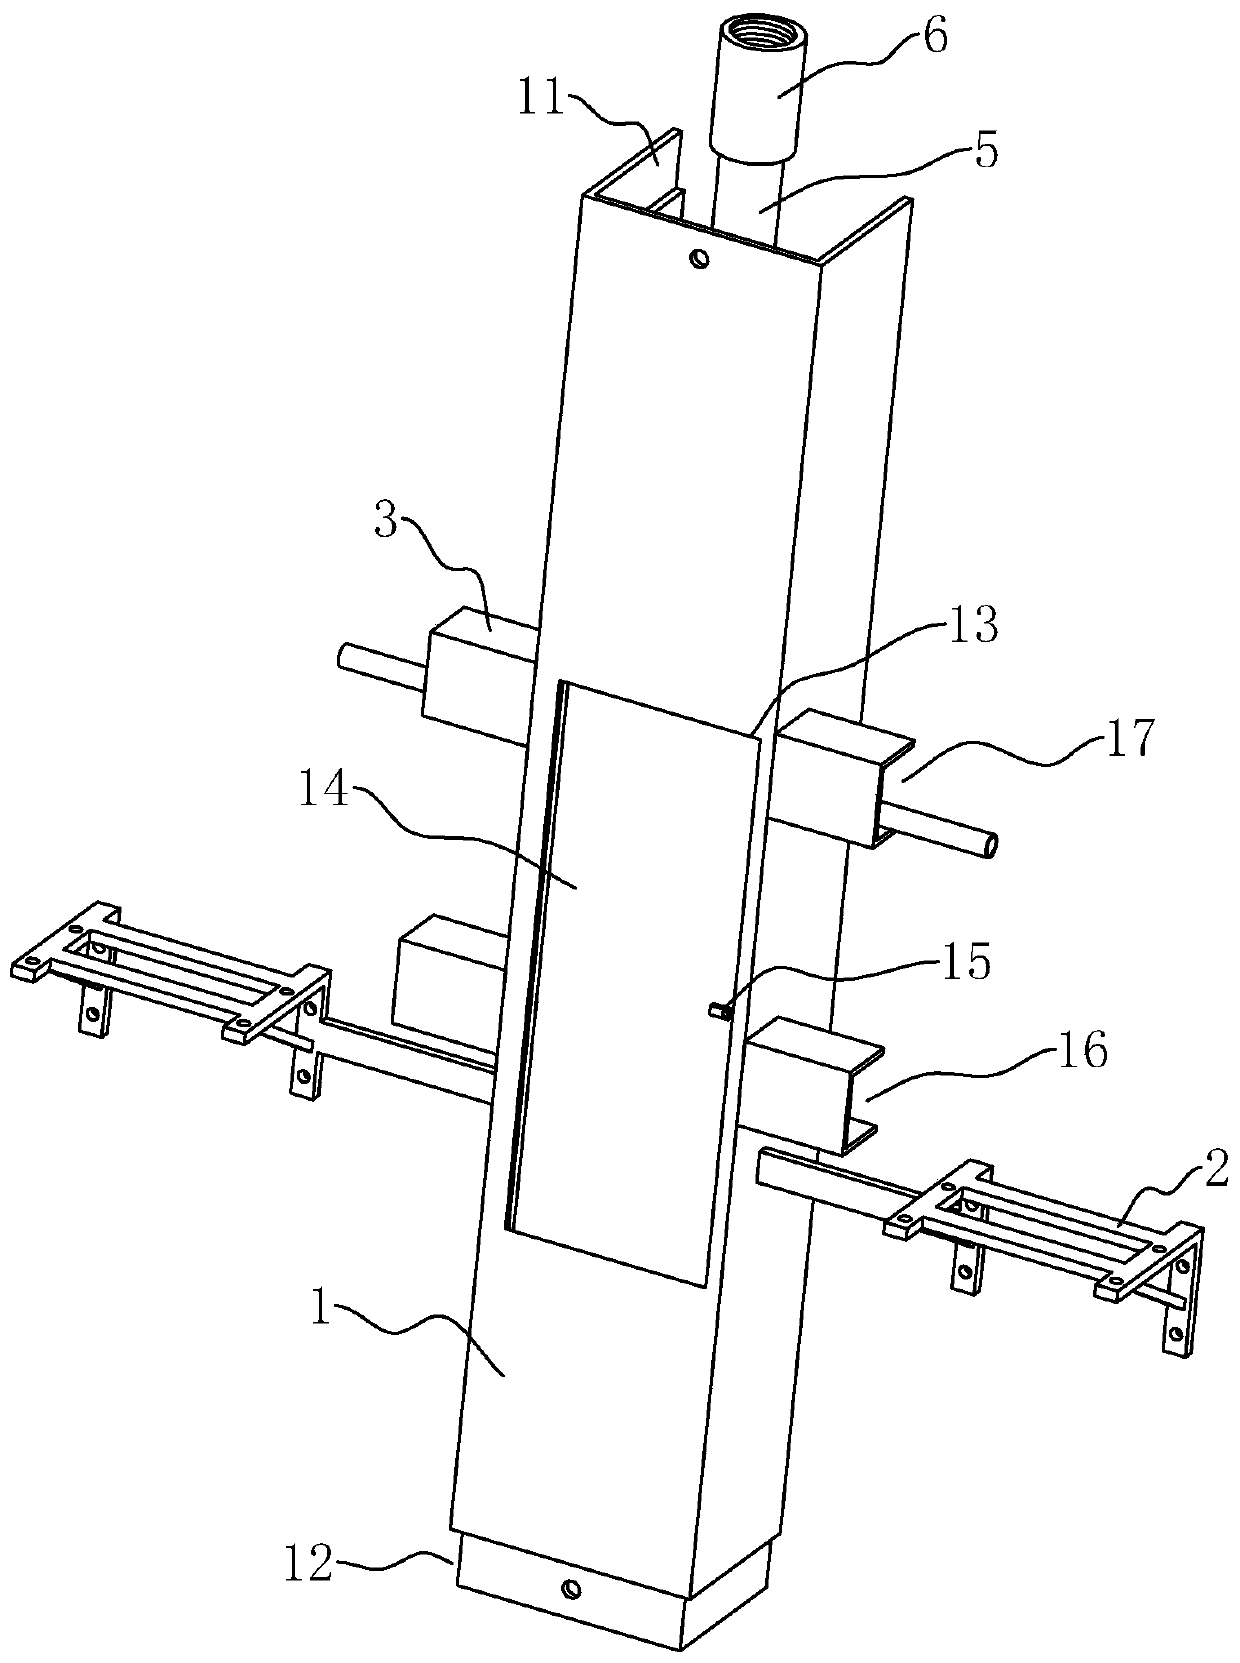 Auxiliary mounting structure for building vertical surface air conditioner external unit